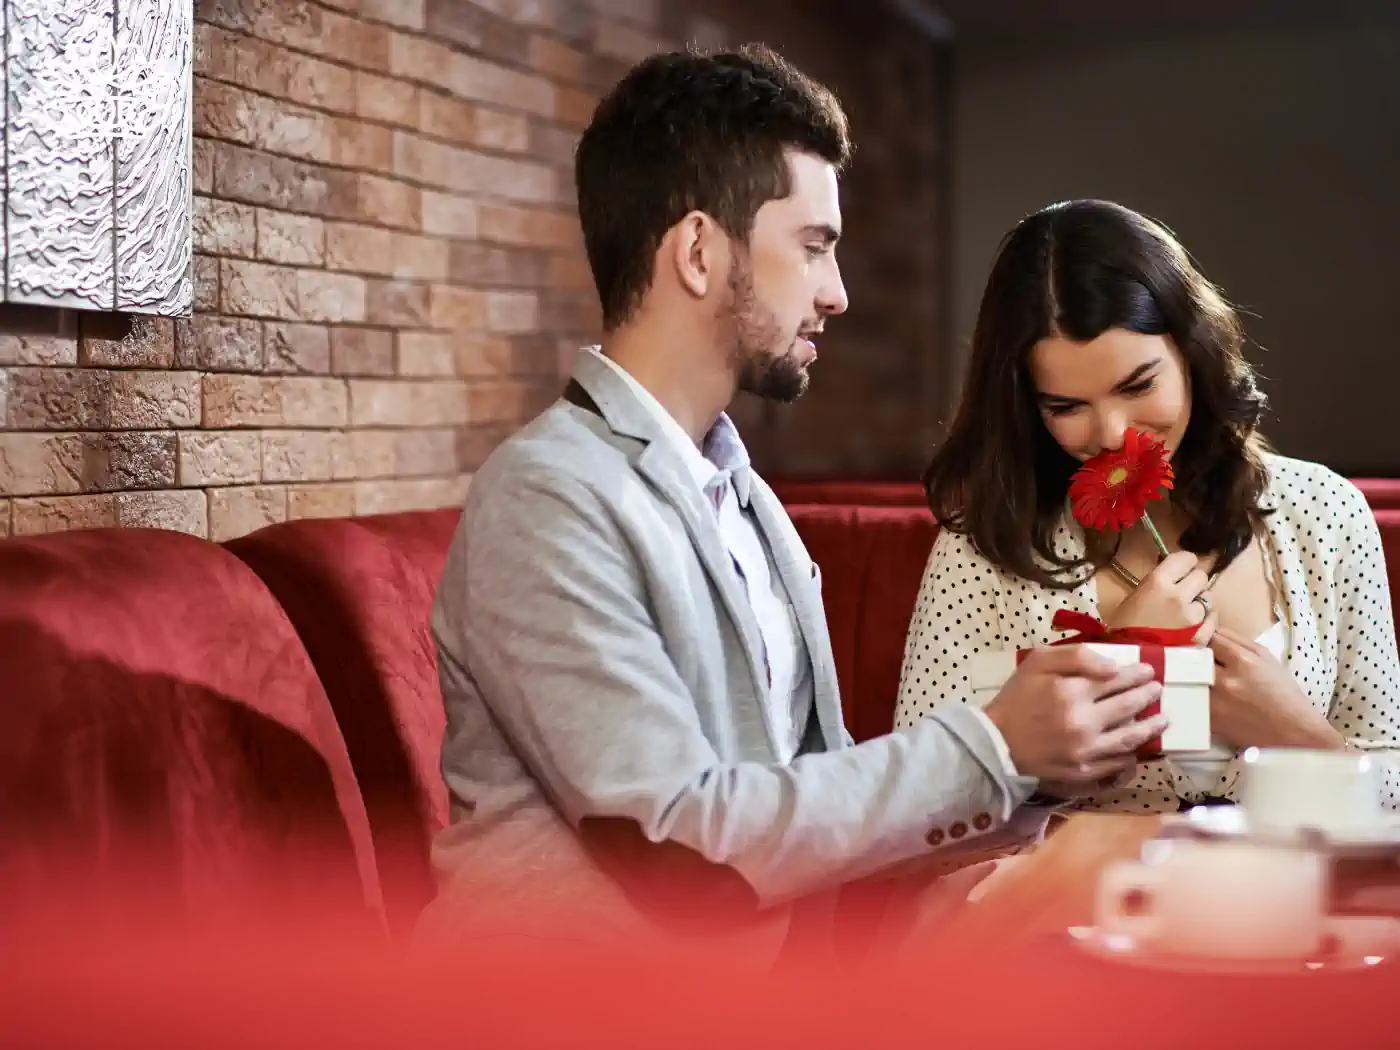 Image of a man in a restaurant giving a single red flower to a woman across the table, both looking happy. Fabulous Flowers and Gifts - Luxury Flower Bouquets.